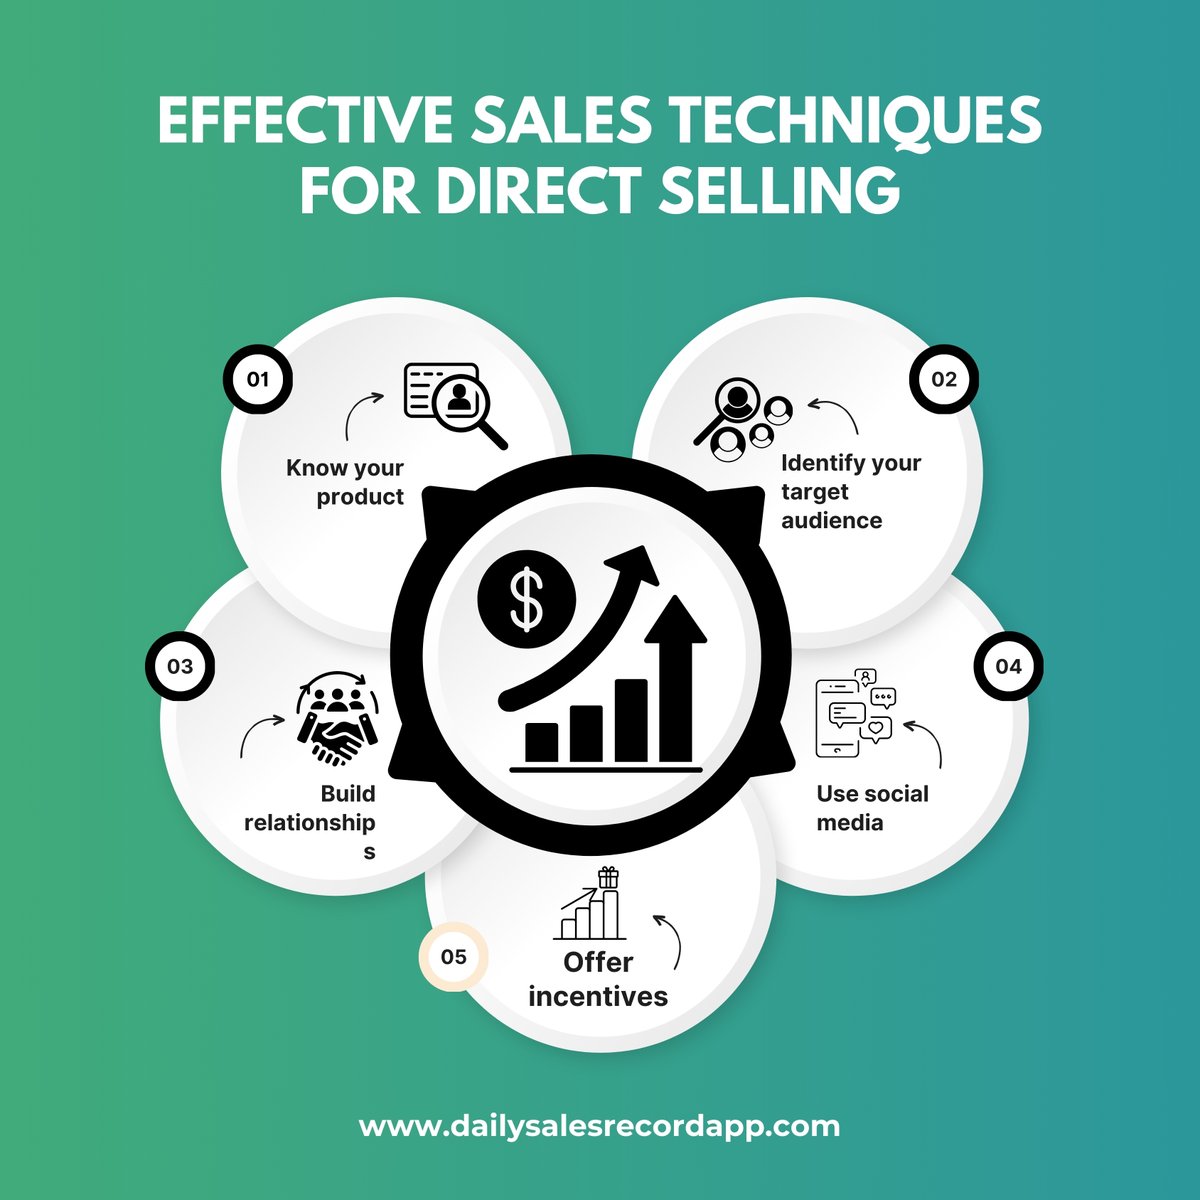 Direct selling is an art that requires a combination of effective sales techniques to succeed. It involves selling products or services directly to consumers without the need for middlemen.

#directselling
#salestechniques
#relationshipbuilding
#personalizedattention